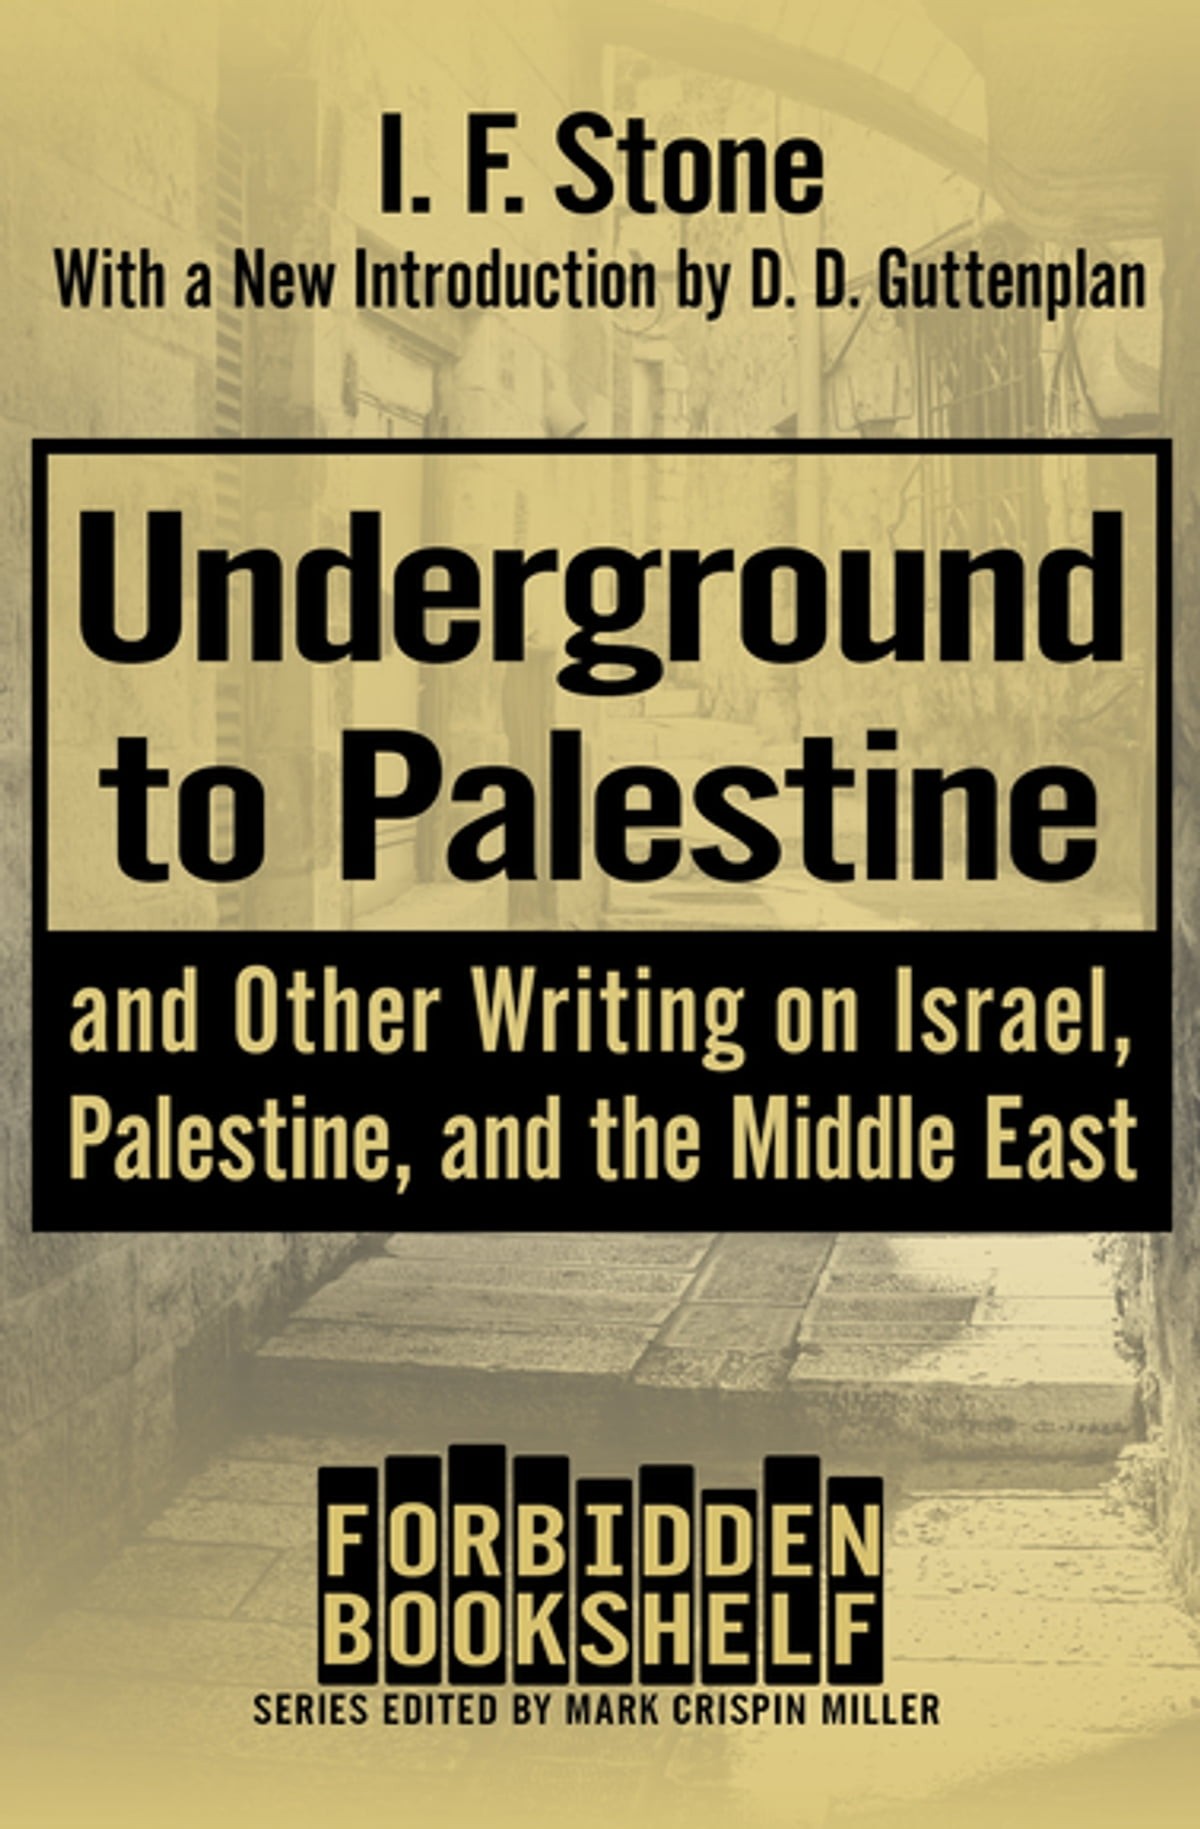 Underground to Palestine: And Other Writing on Israel, Palestine, and the Middle East